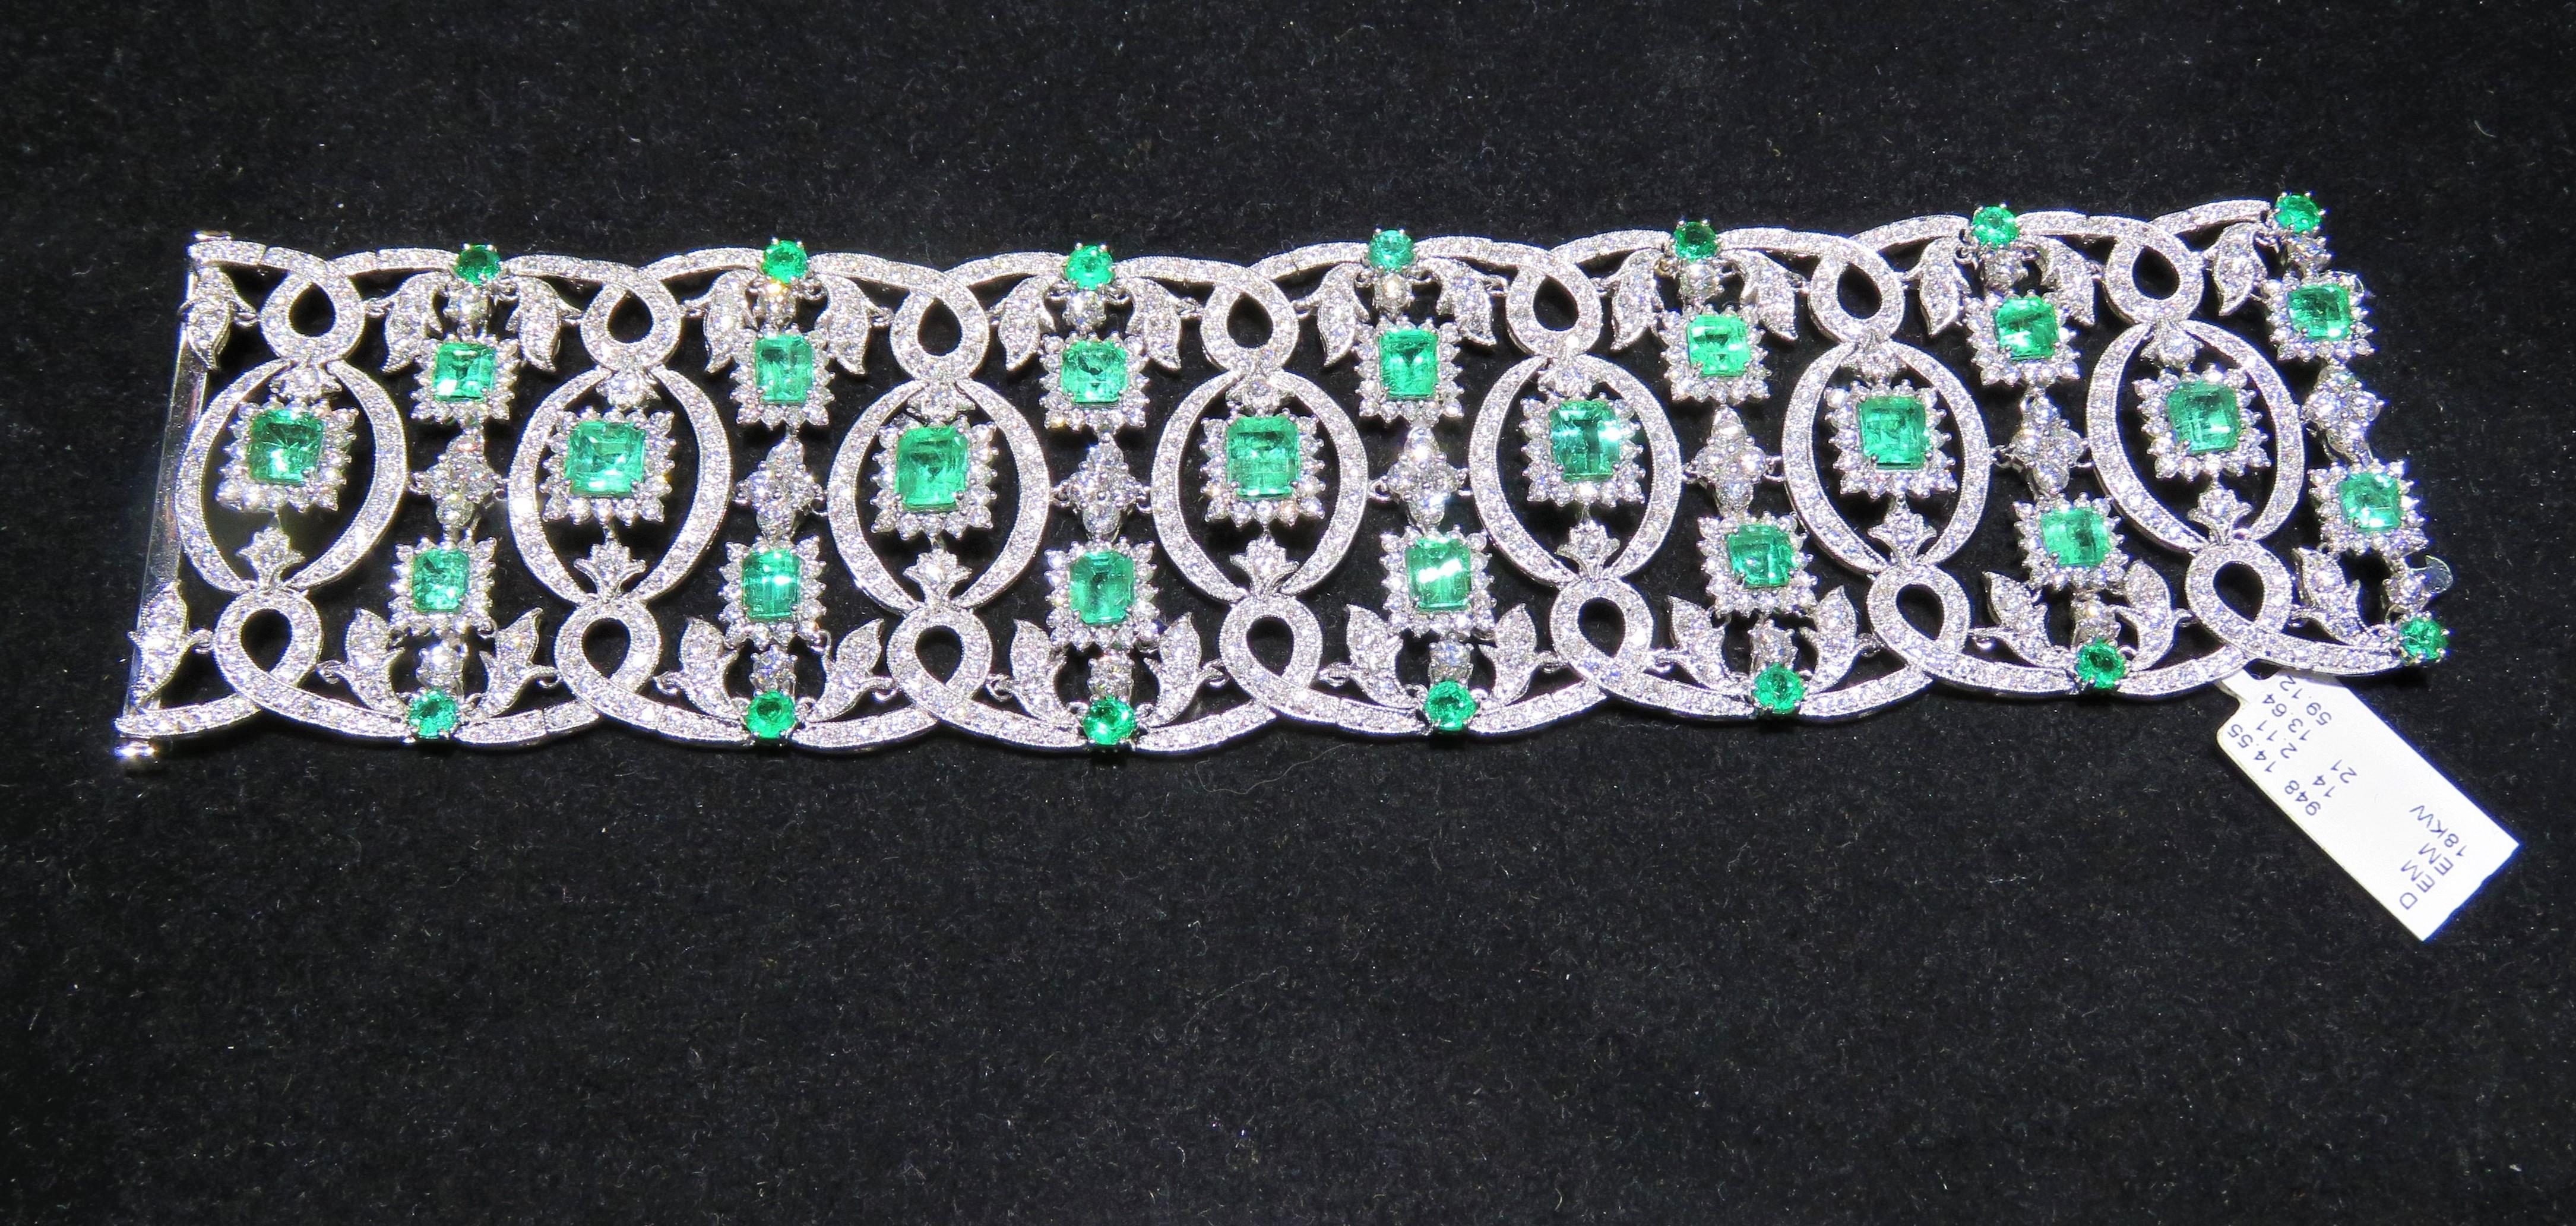 The Following Items we are offering is a Pair of Rare 18KT Gold Emerald Diamond Bracelet. Bracelet is comprised of Finely Set Gorgeous Glittering Emeralds and Diamonds!!! T.C.W. Approx 30CTS. The Emeralds and Diamonds are of Exquisite and Fine